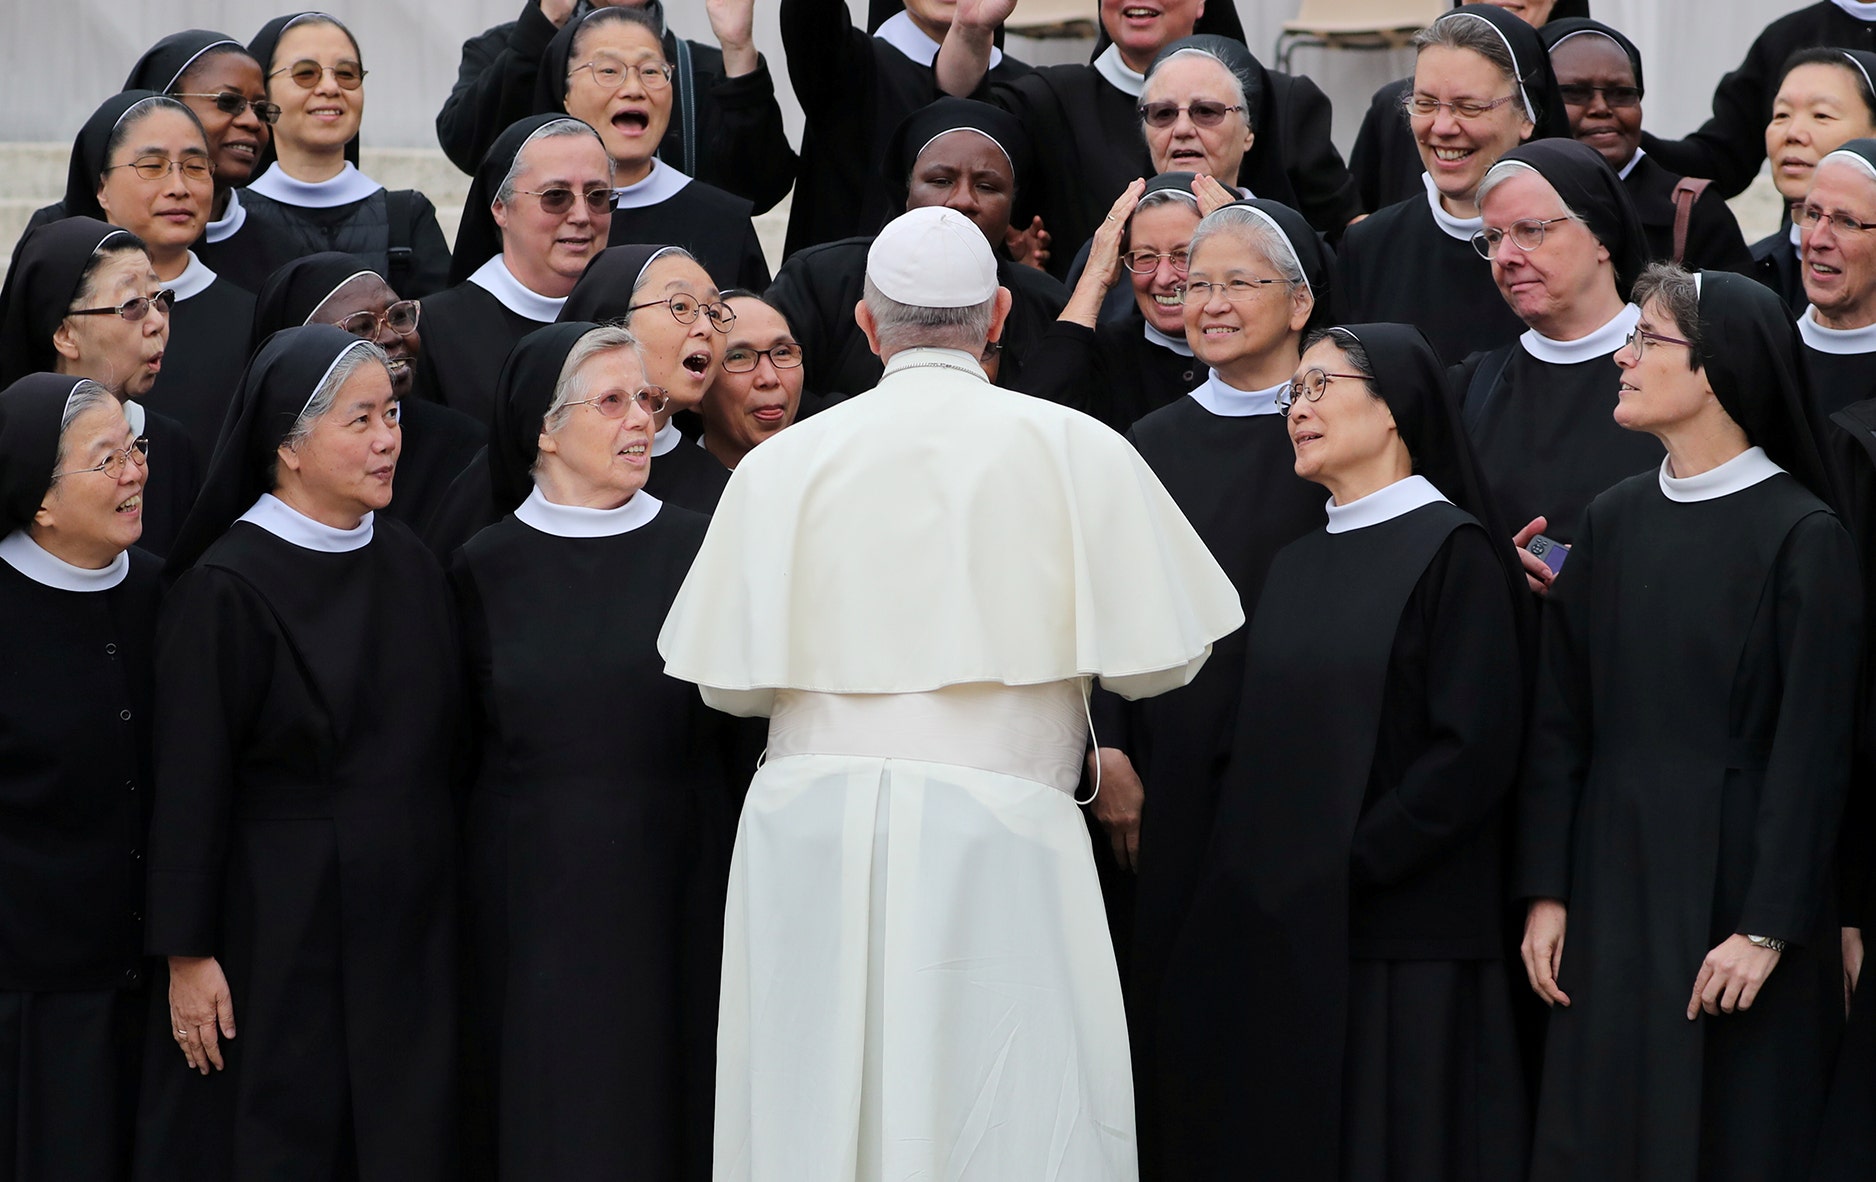 Pope Francis names nuns, lay women among new Dicastery for Bishops